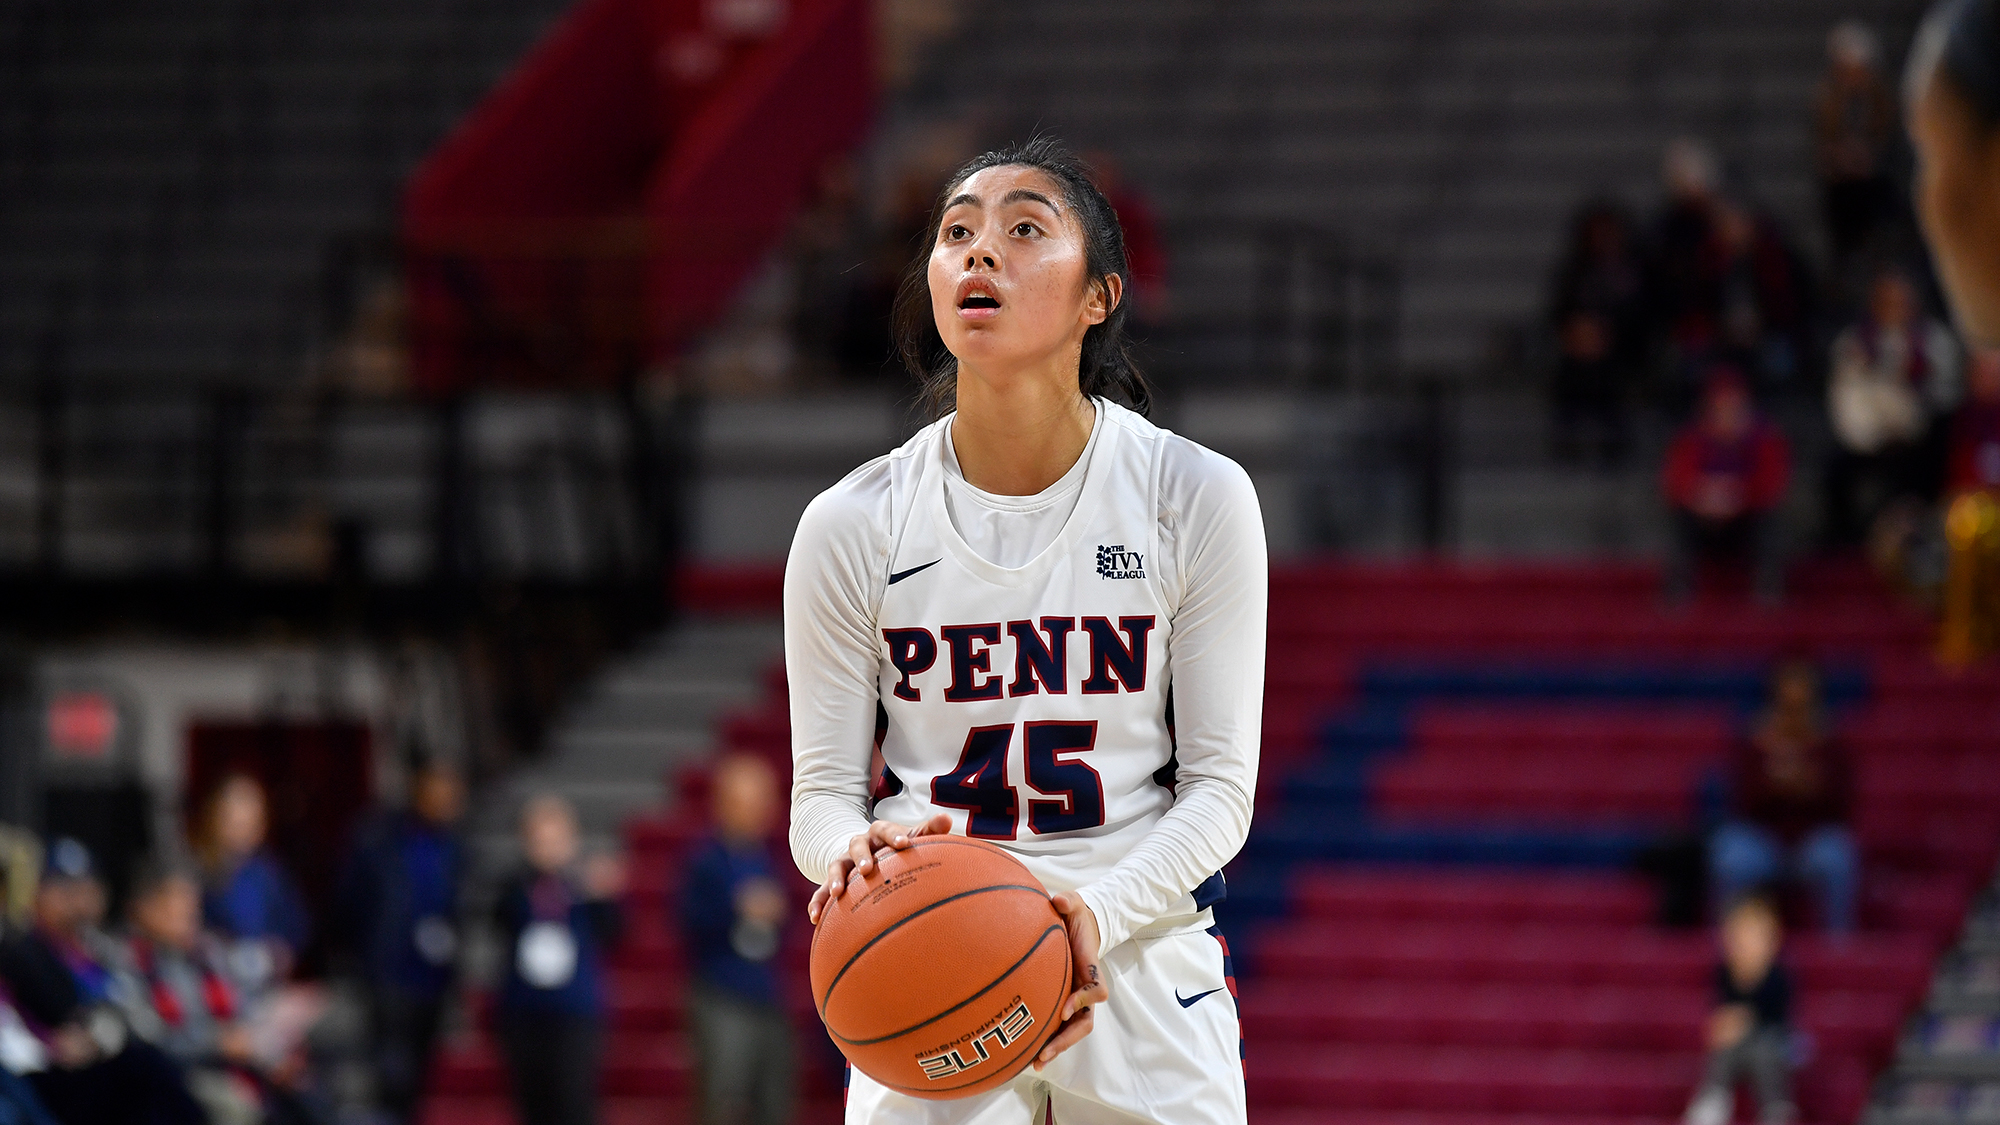 Padilla is set to shoot a foul shot during a game at the Palestra.